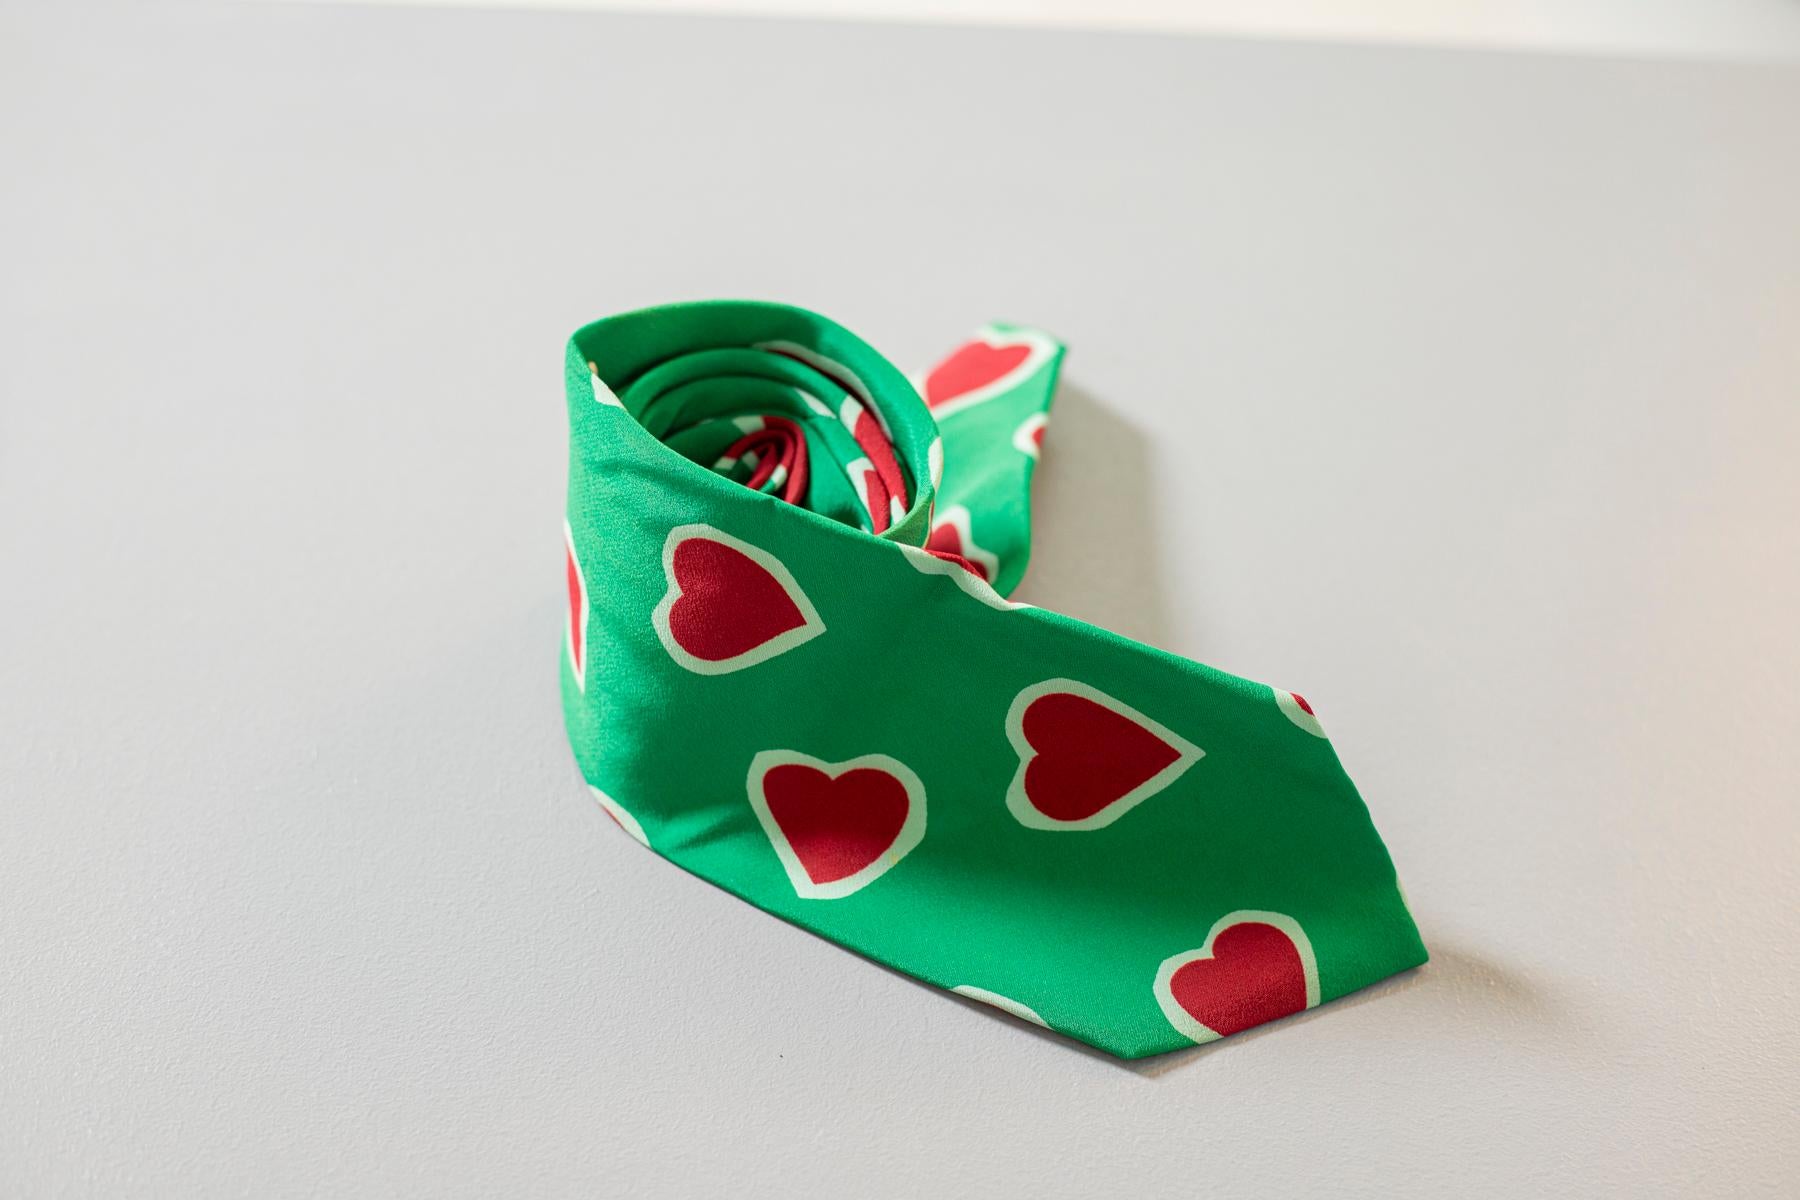 Nice and quirky, this tie is designed by the famous Italian designer Moschino. It is made of silk, decorated with red hearts on a bright green background. Ideal for a romantic evening showing your nice side. We recommend combining it with a shirt